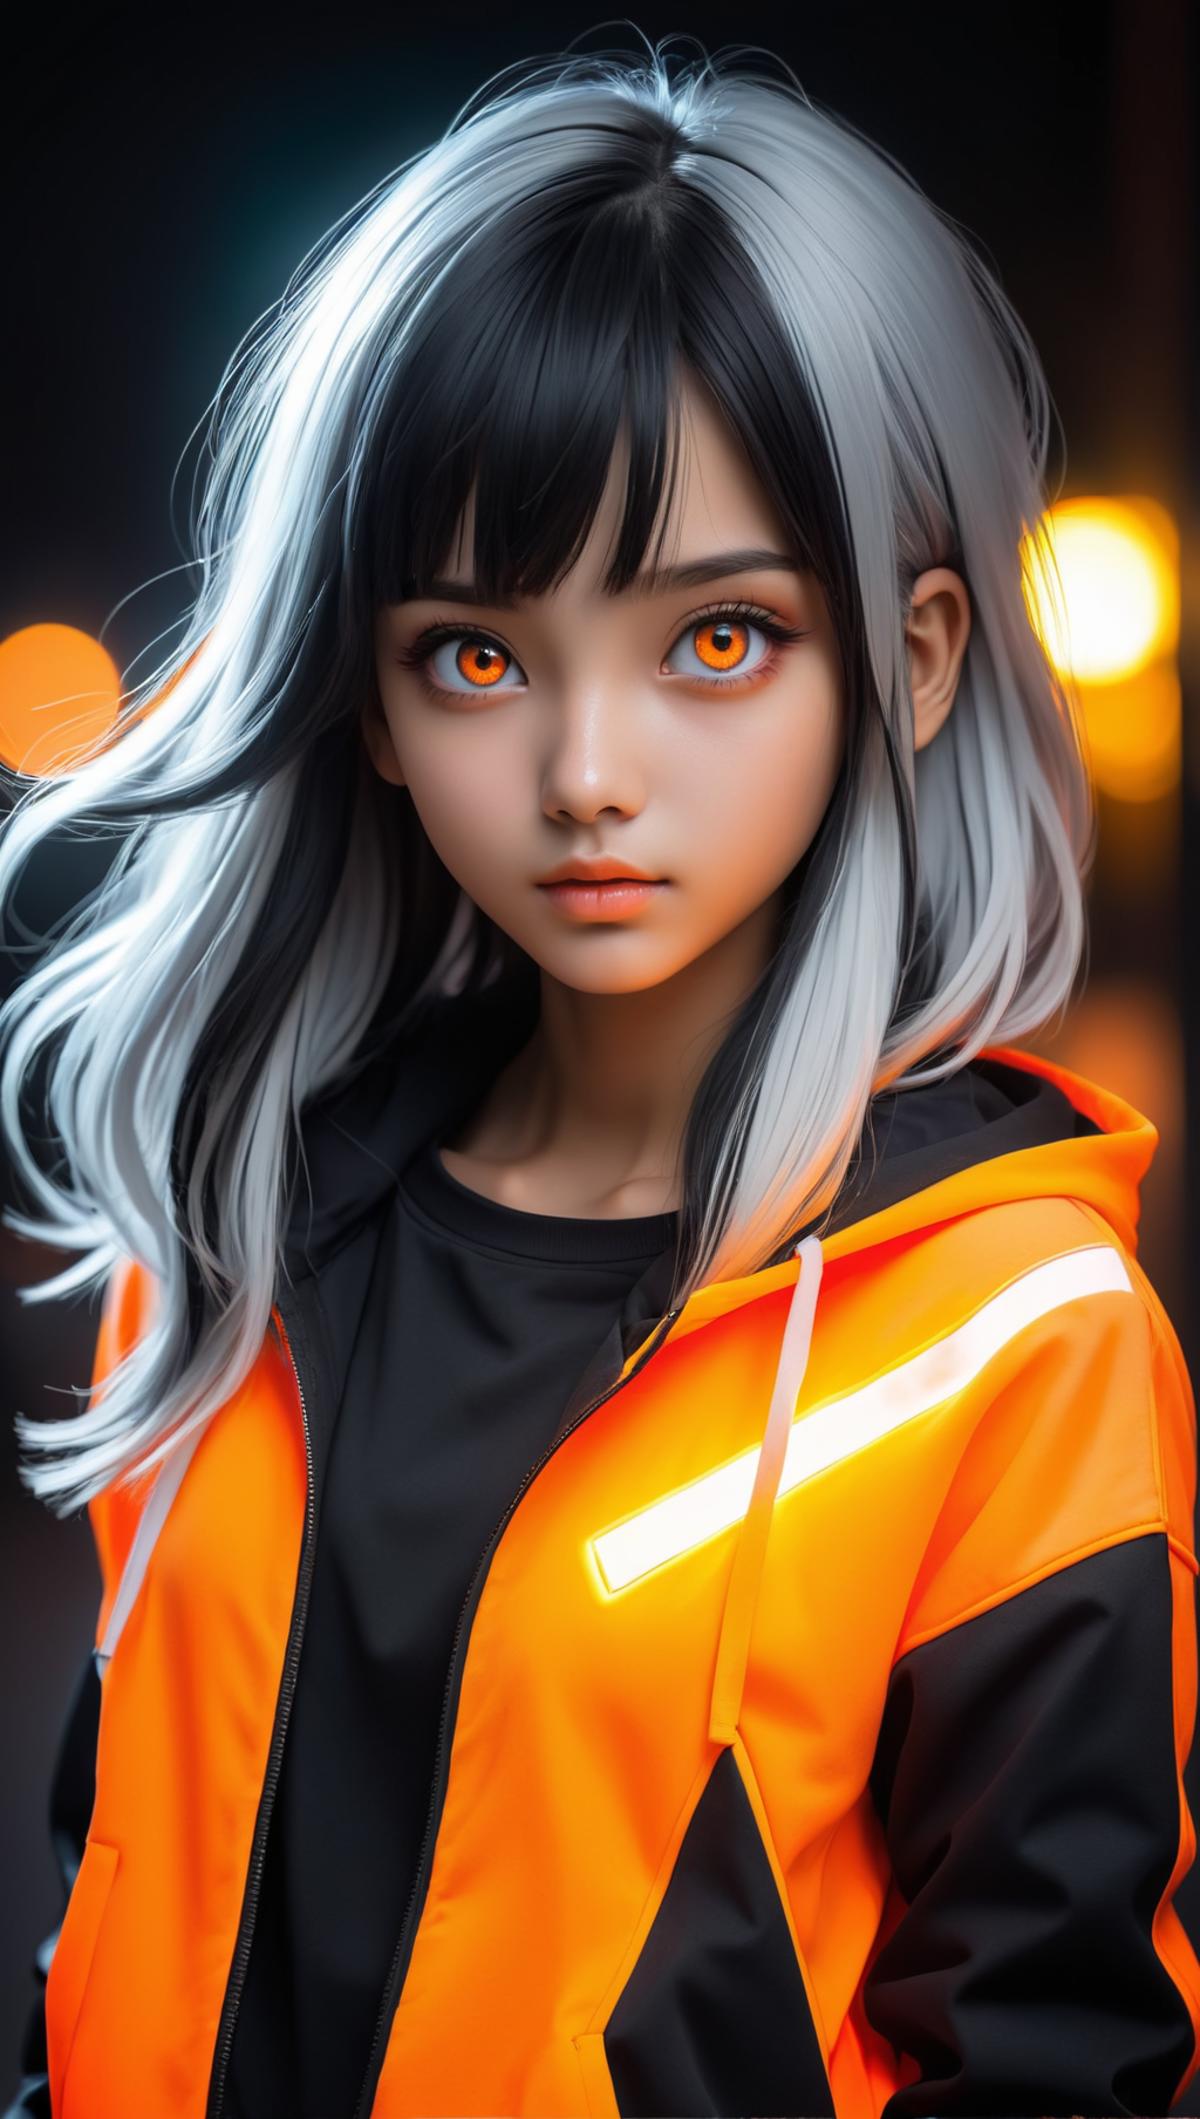 A 3D rendered image of a young woman wearing an orange hoodie.